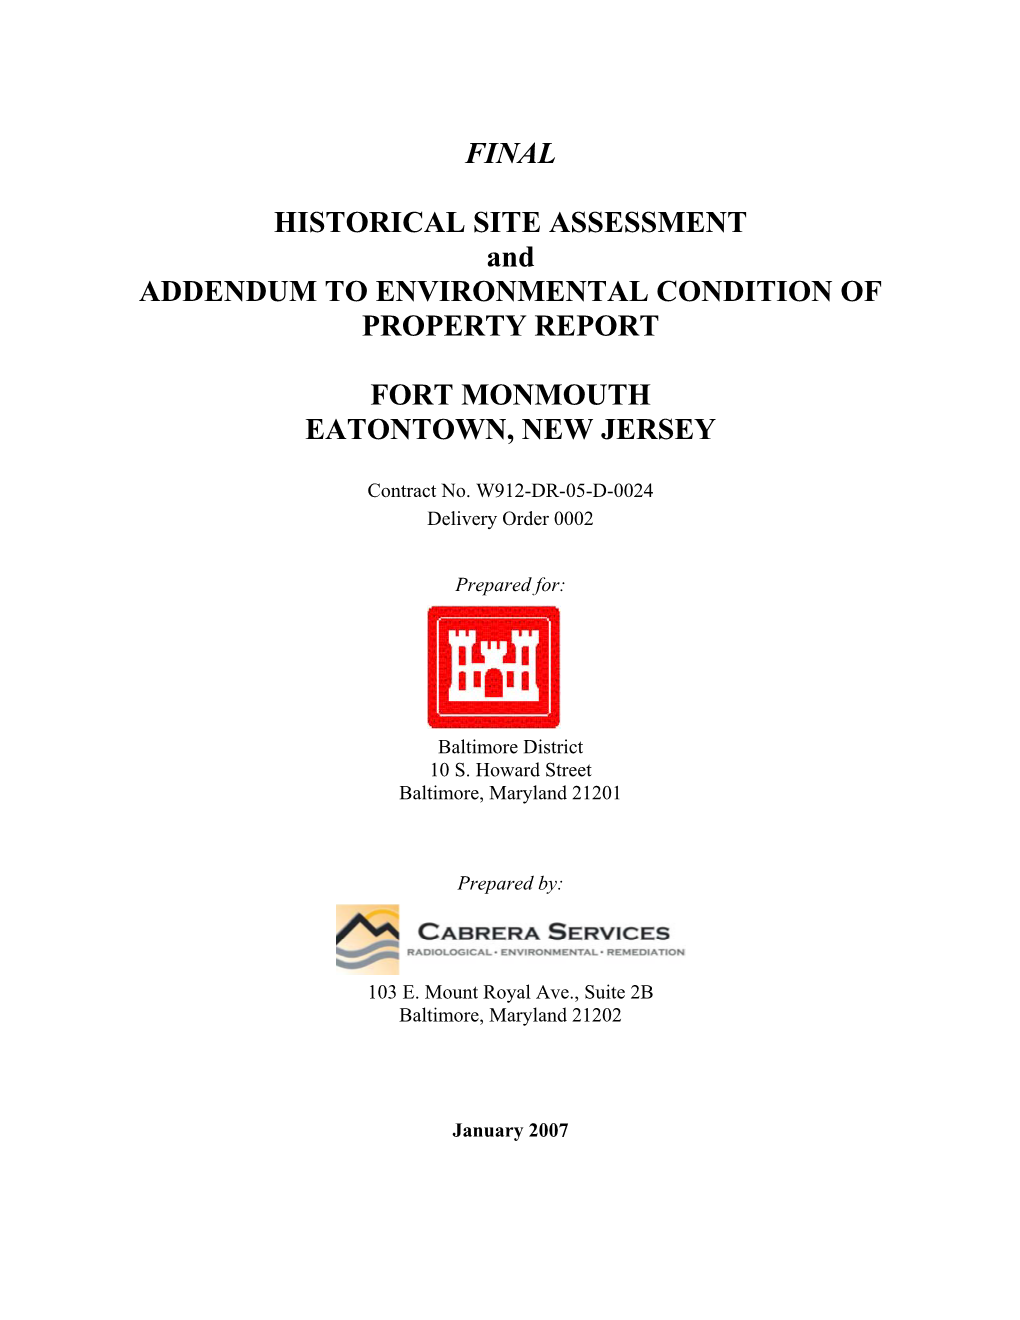 Final – Historical Site Assessment and Addendum to Environmental